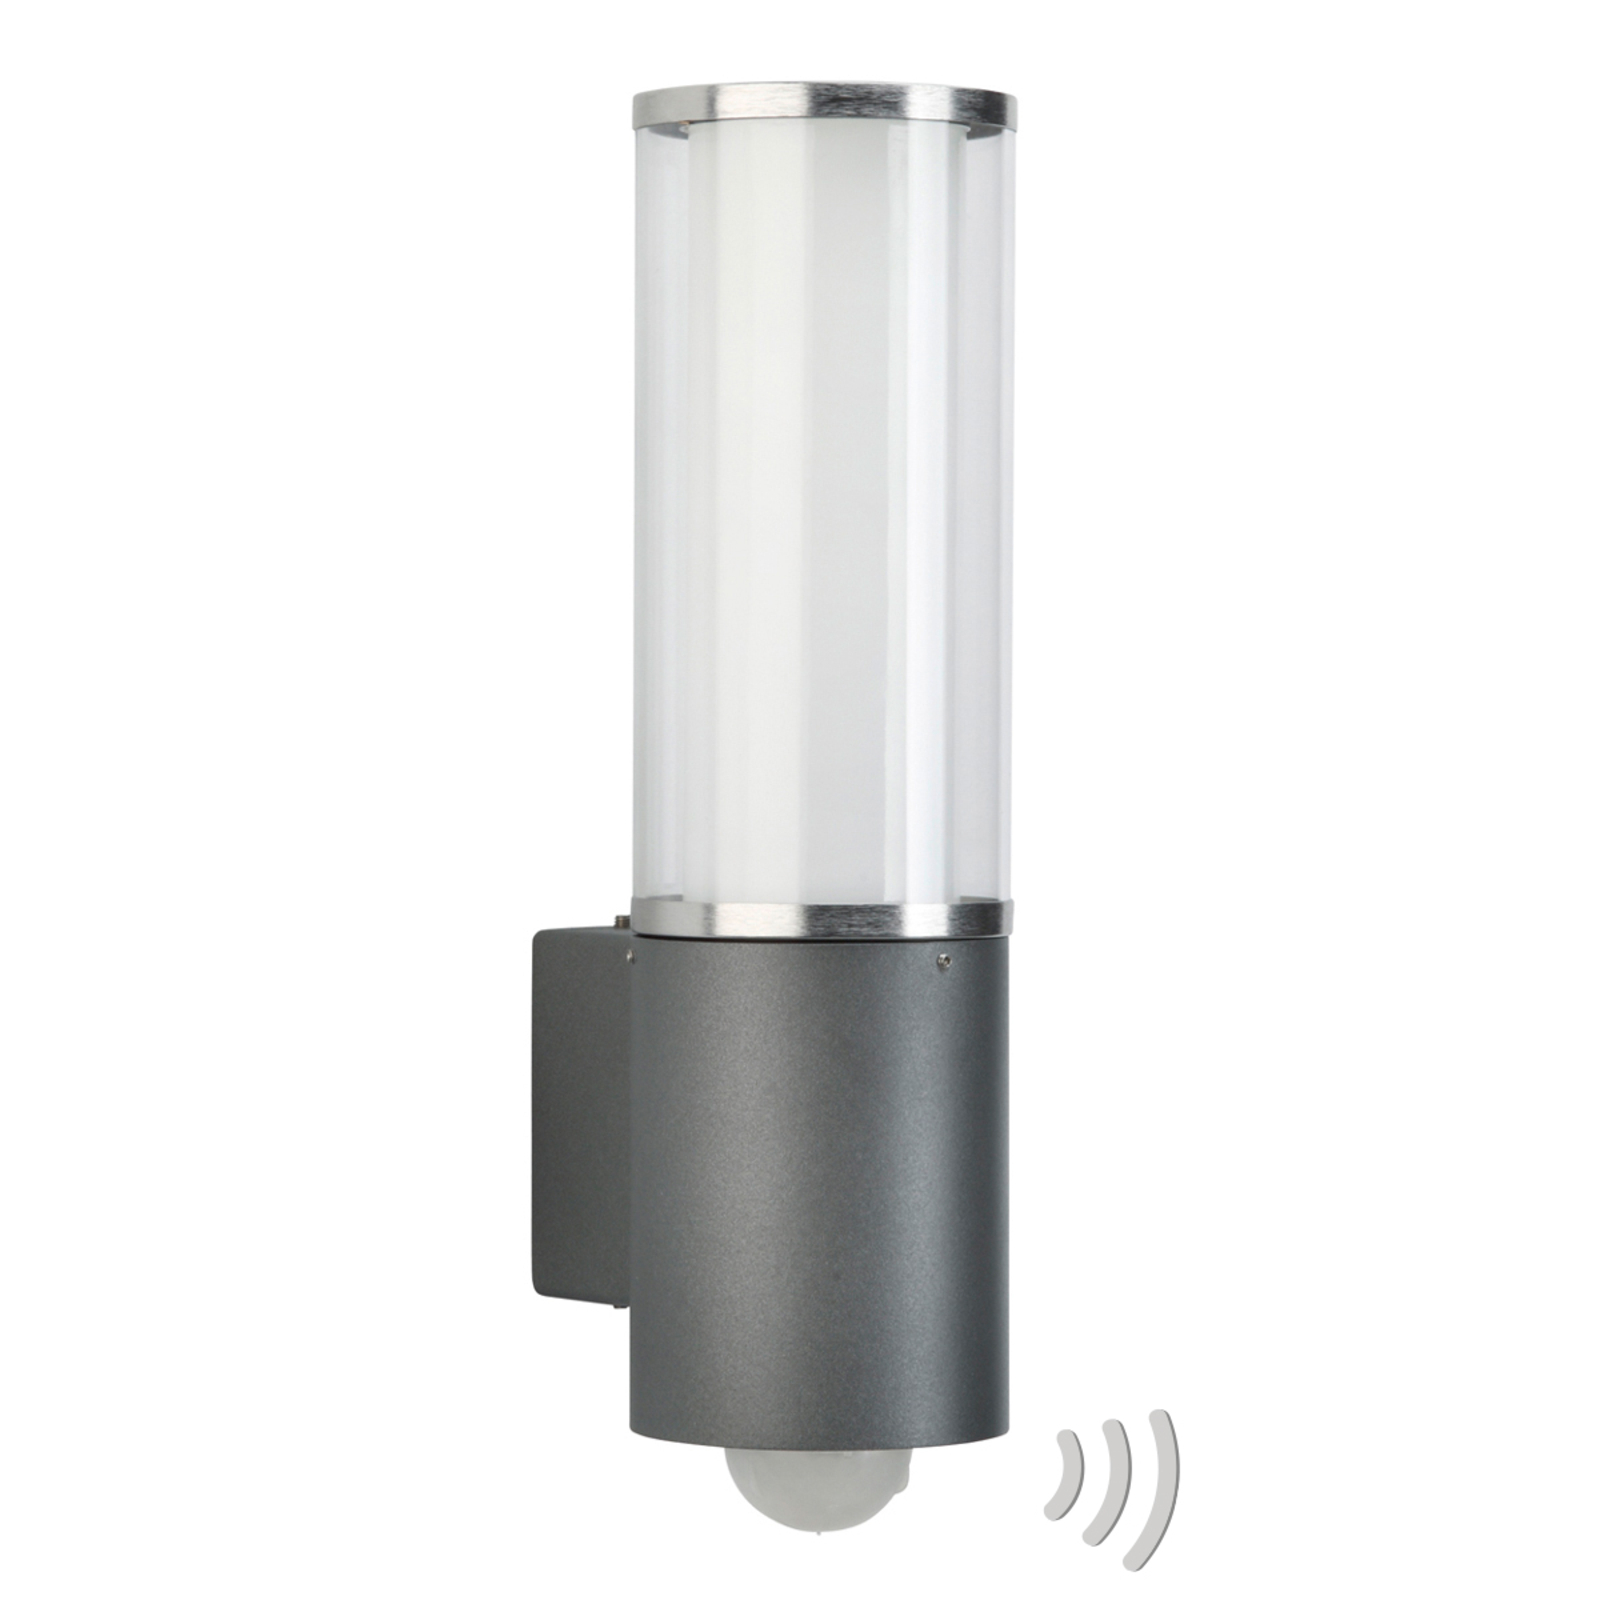 Outdoor wall light Elettra with motion detector